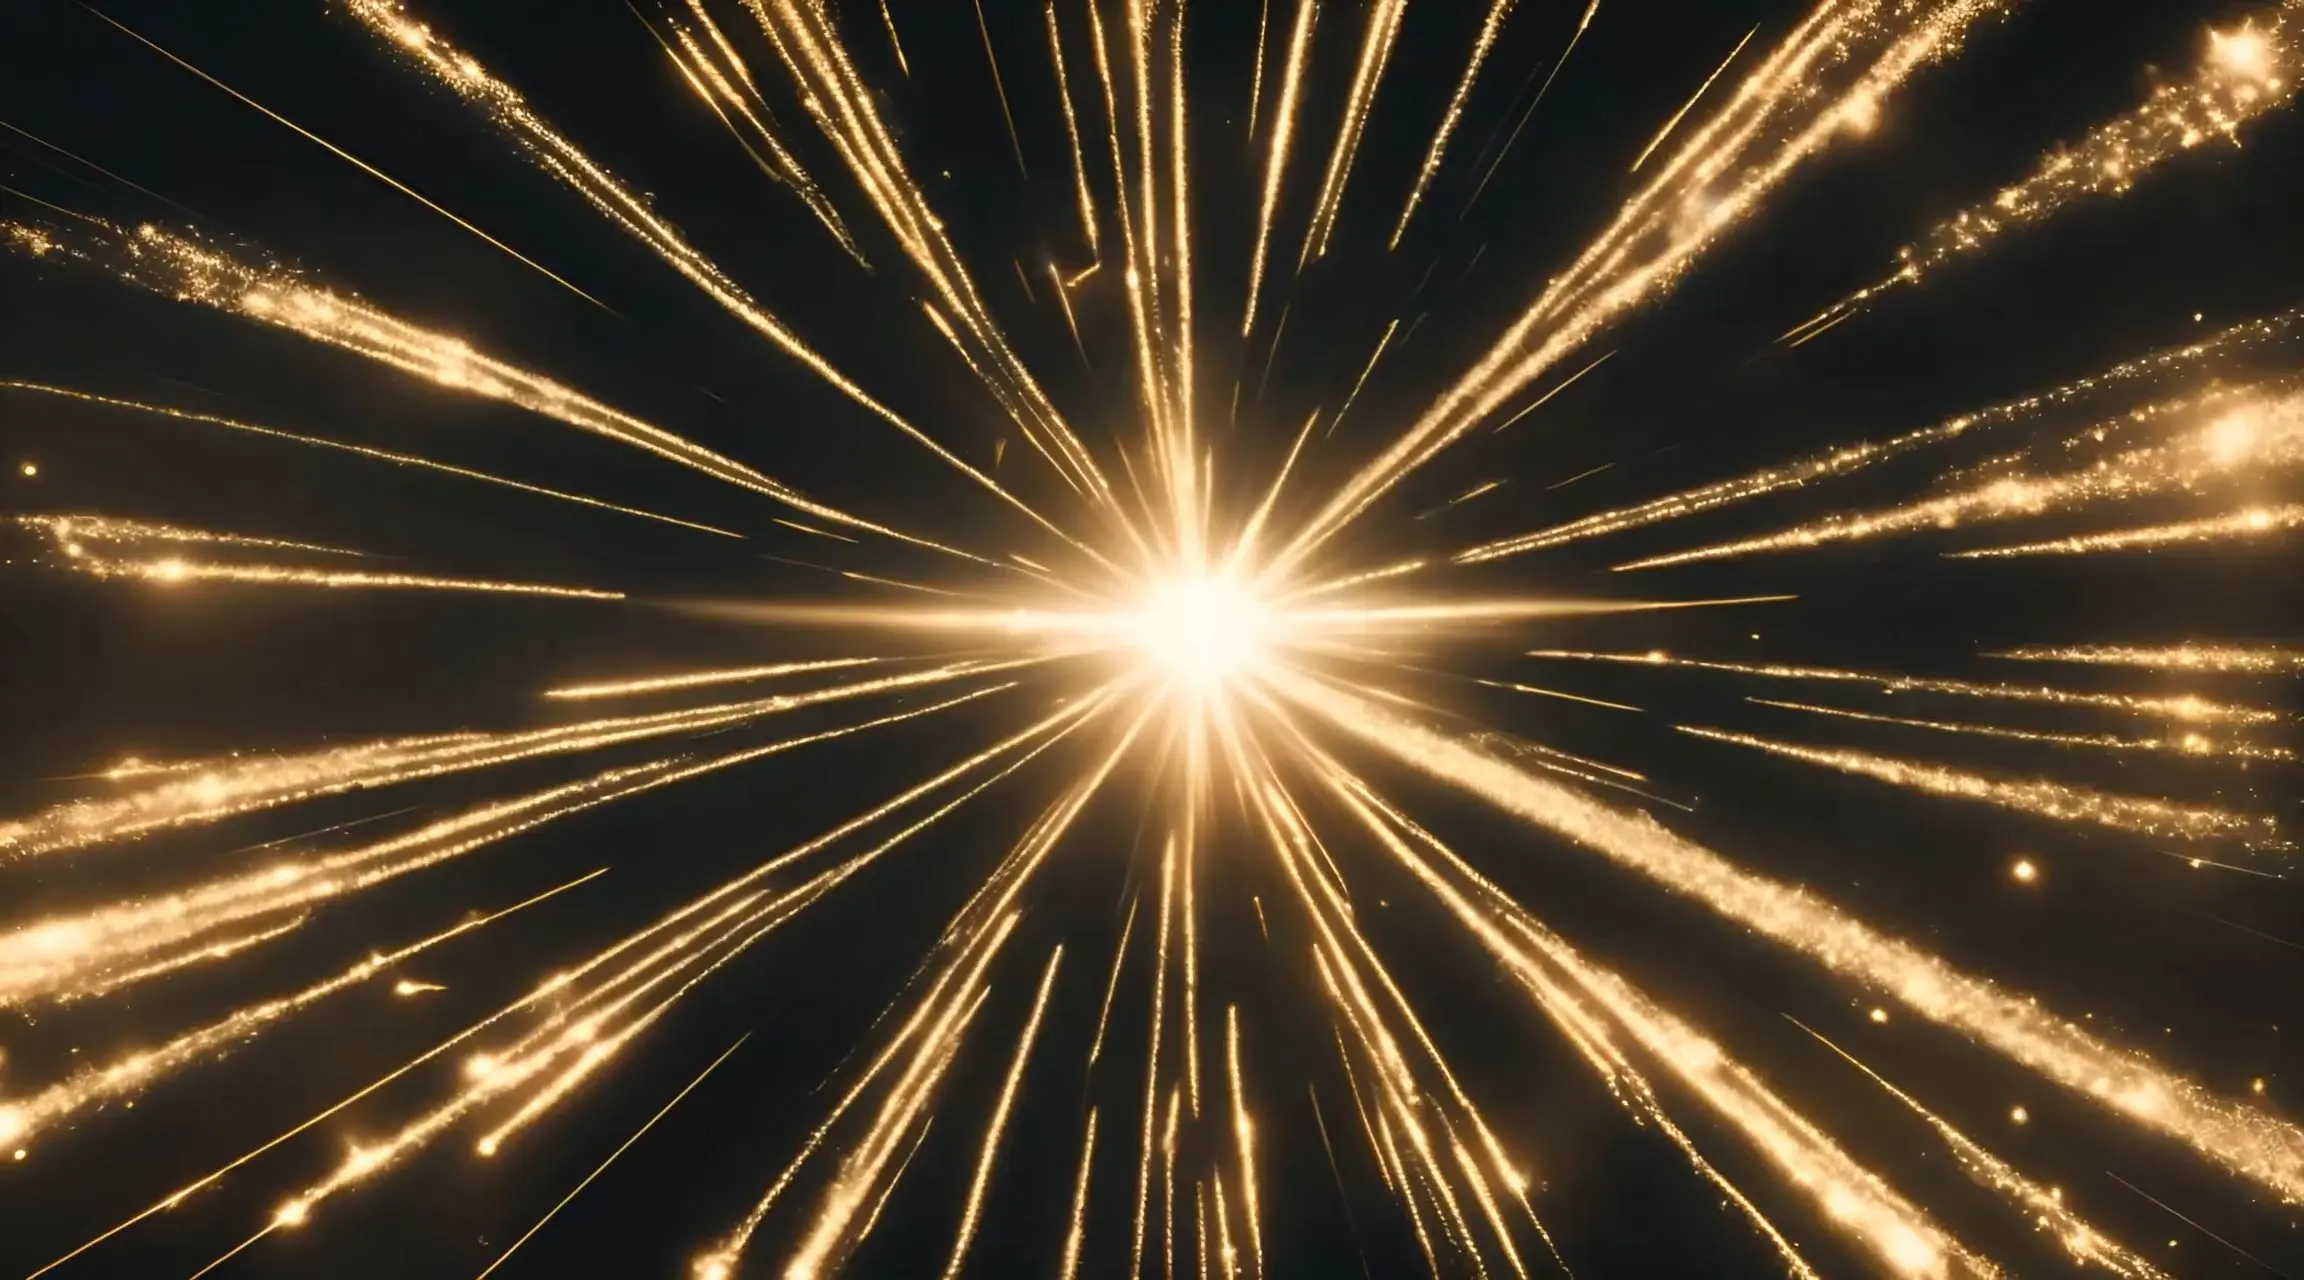 Fireworks of Gold Particles